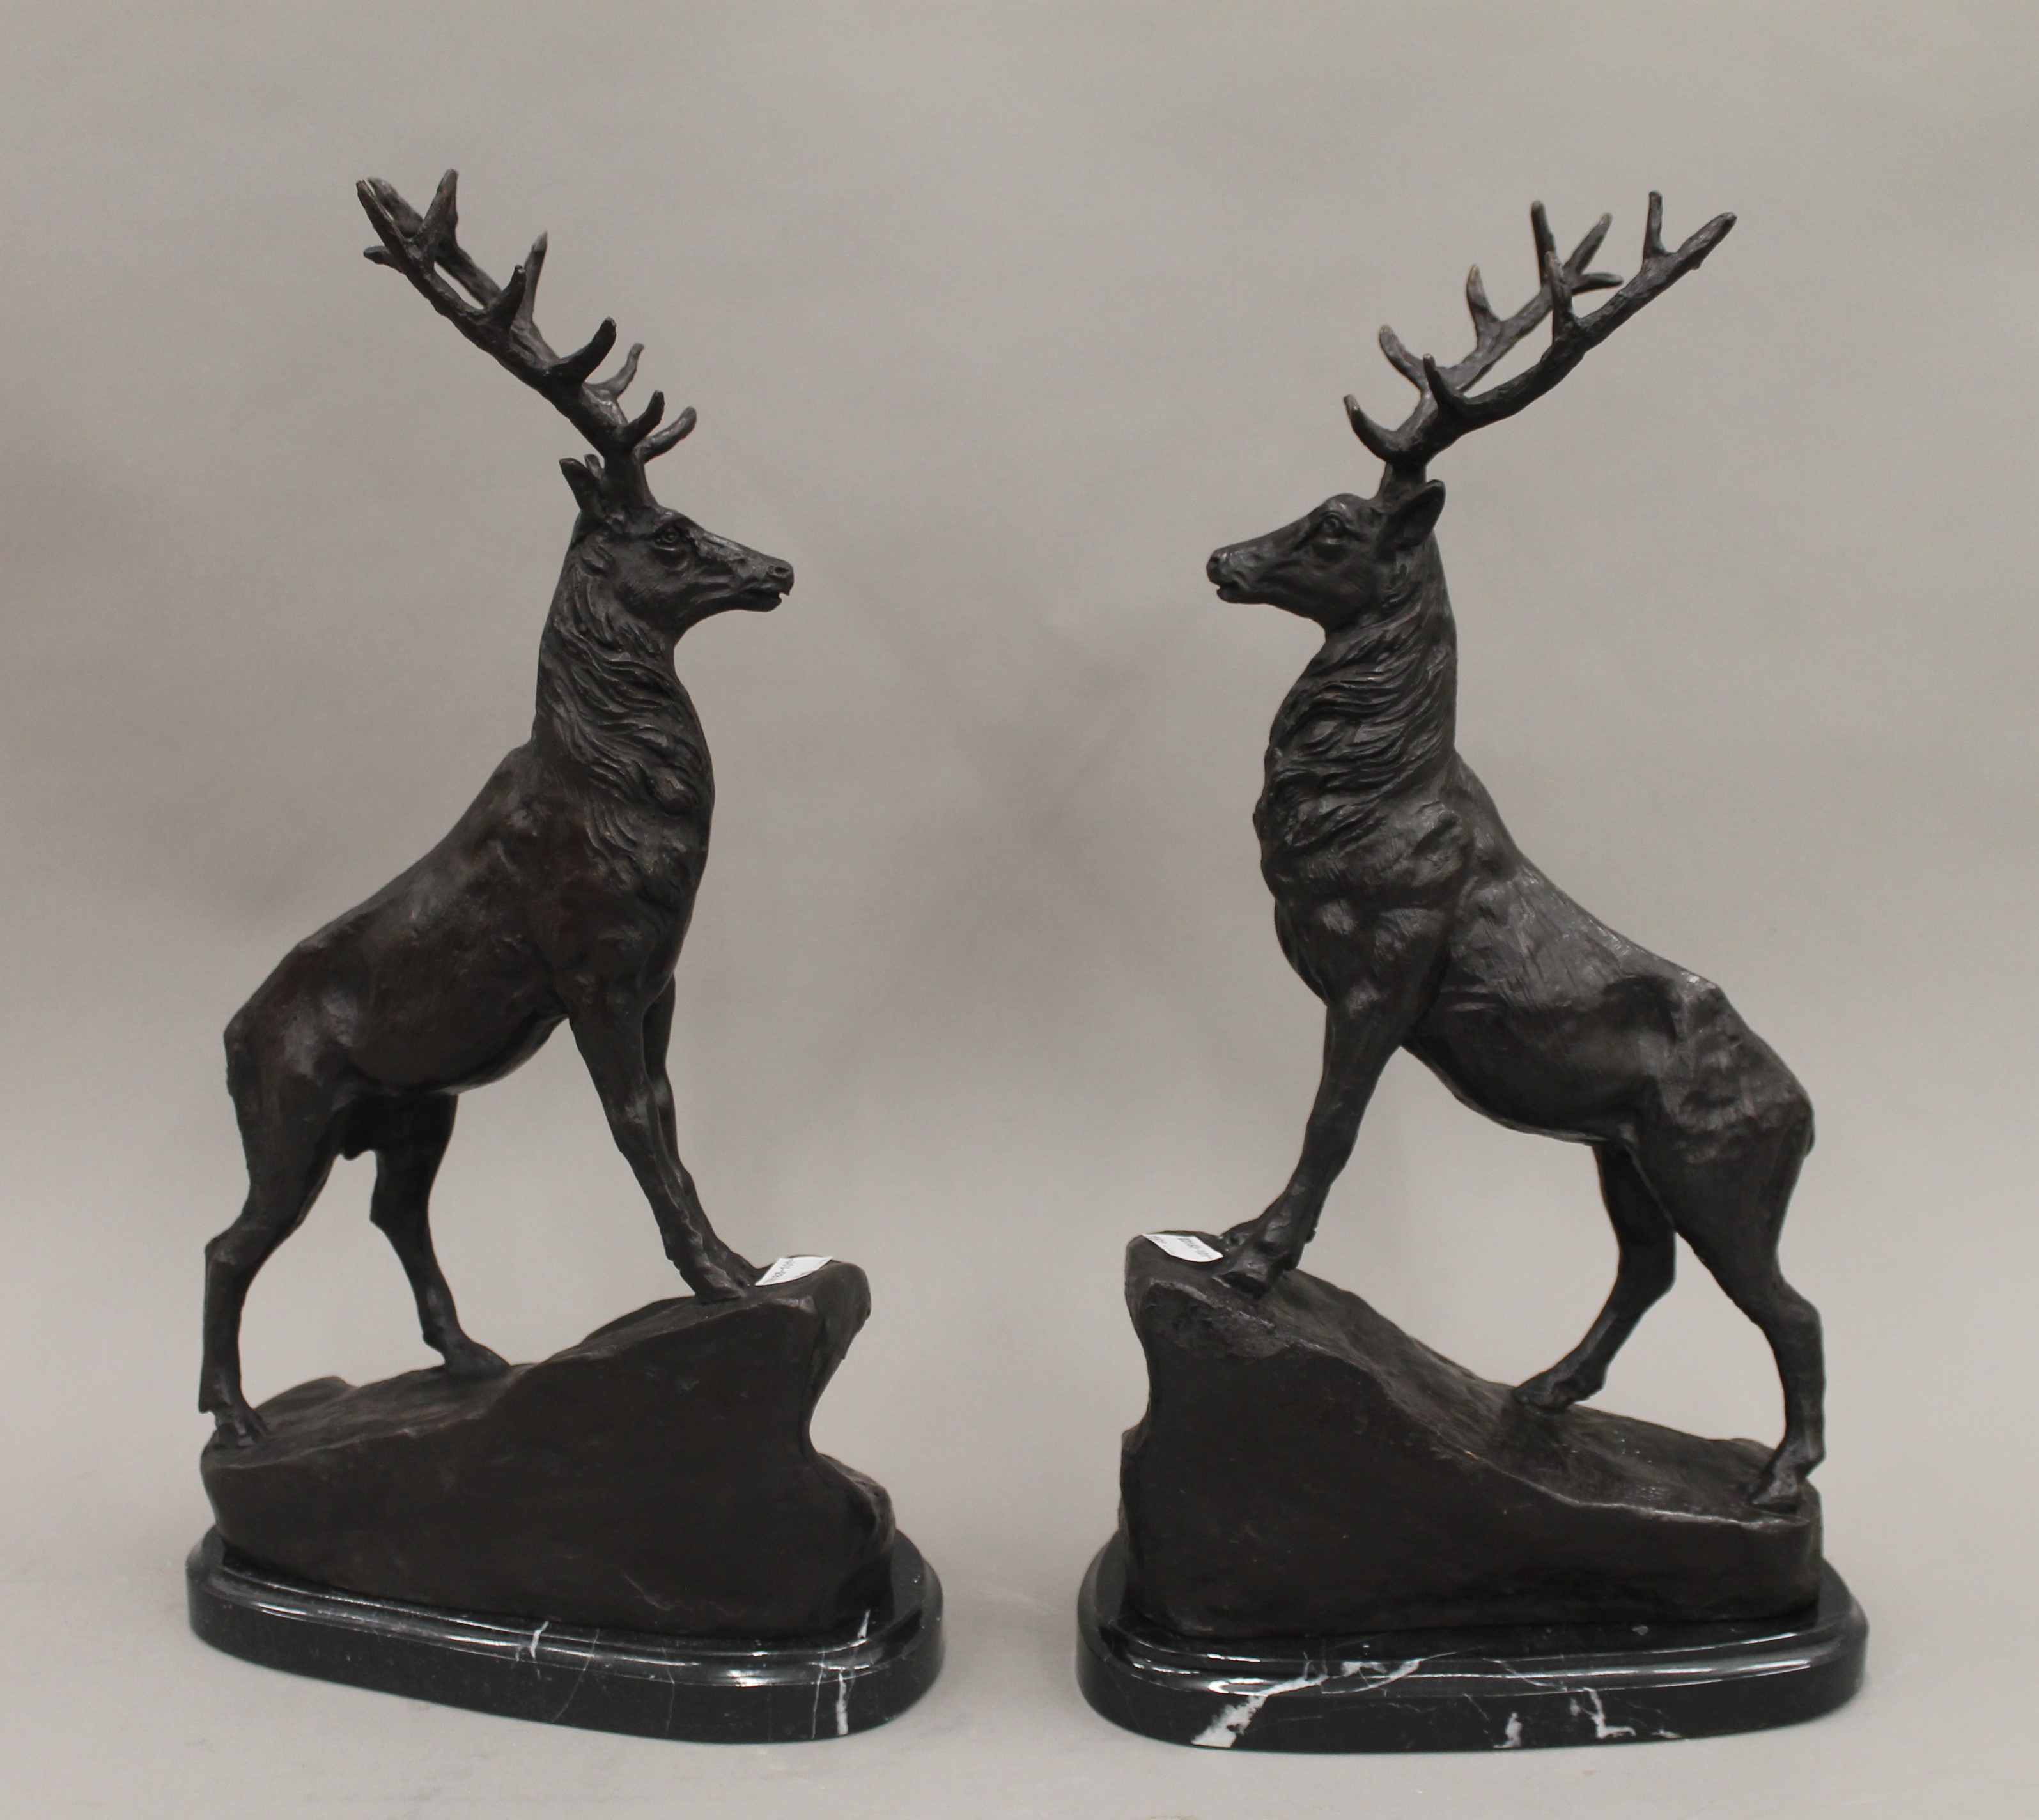 A pair of bronze stags. 42.5 cm high.